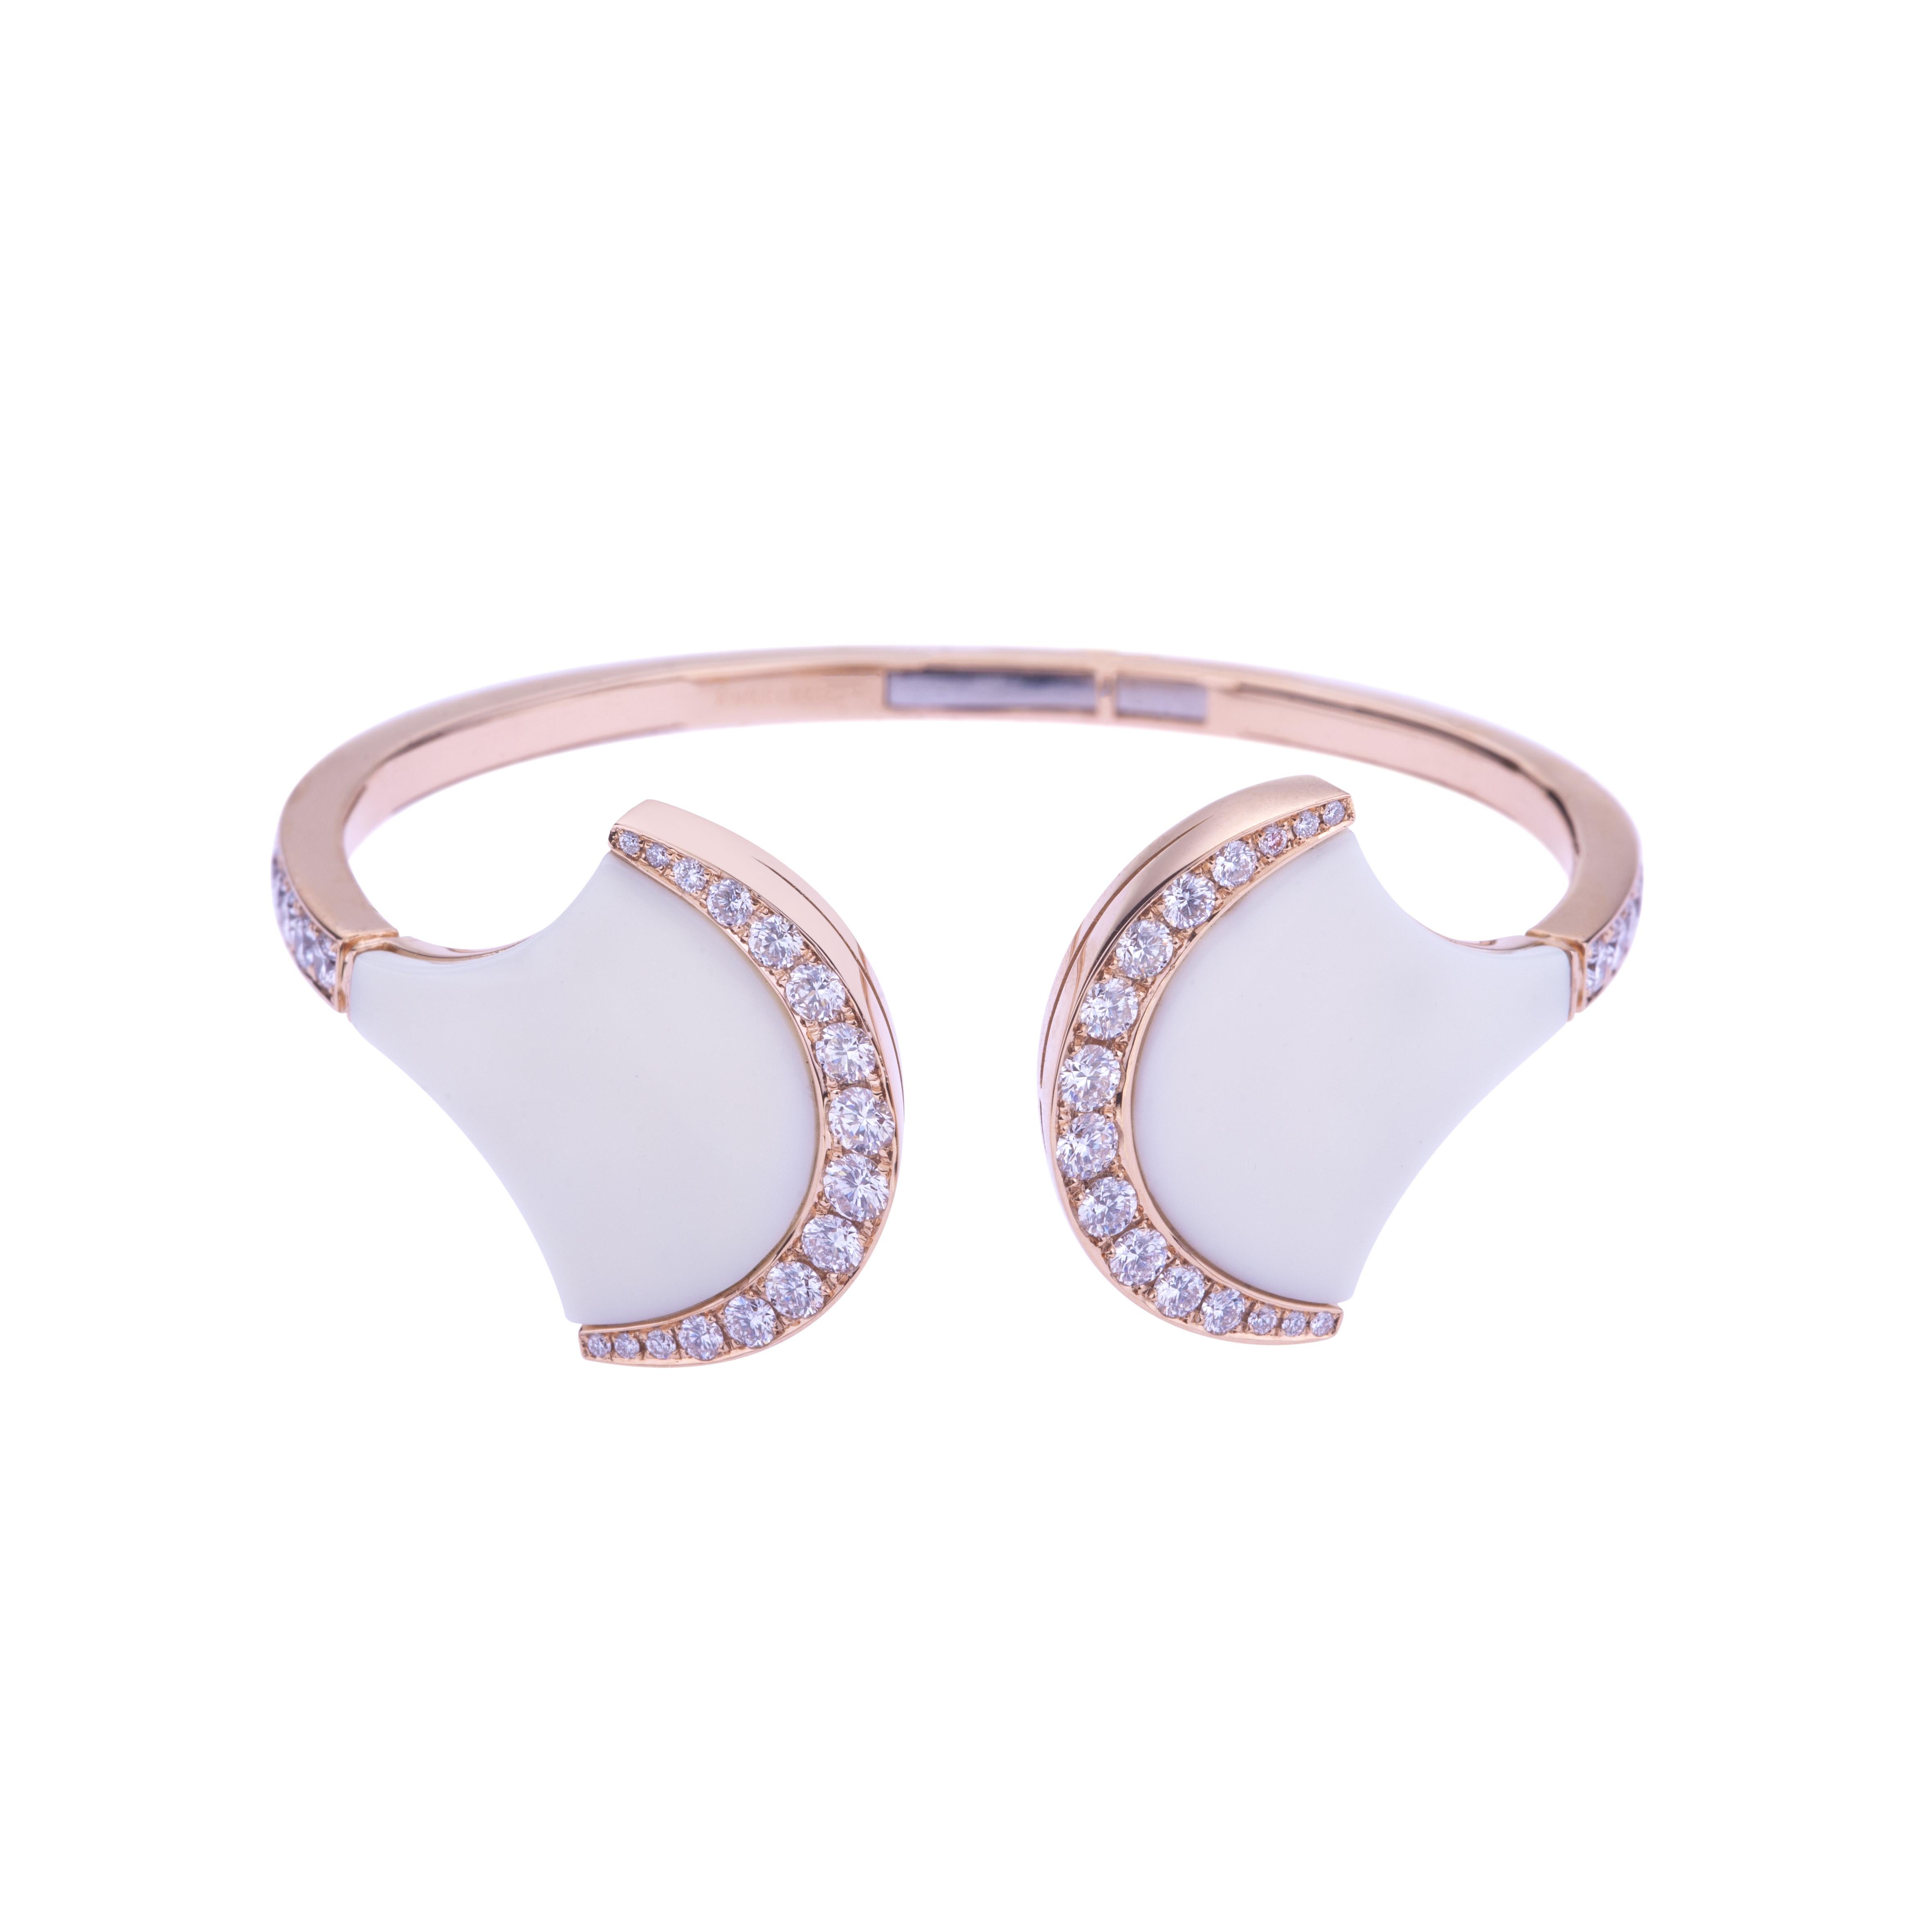 Exclusive Wave Bangle Rose Gold with White Ceramic and Diamonds.
Everyday fashionable Bangle  with Glossy Ceramic and Diamond ct. 1.87 G-SI. 18kt Gold is around  15 grams. 
Angeletti Boasts an Exceptional History Made of Pure Jewelry Tradition, a